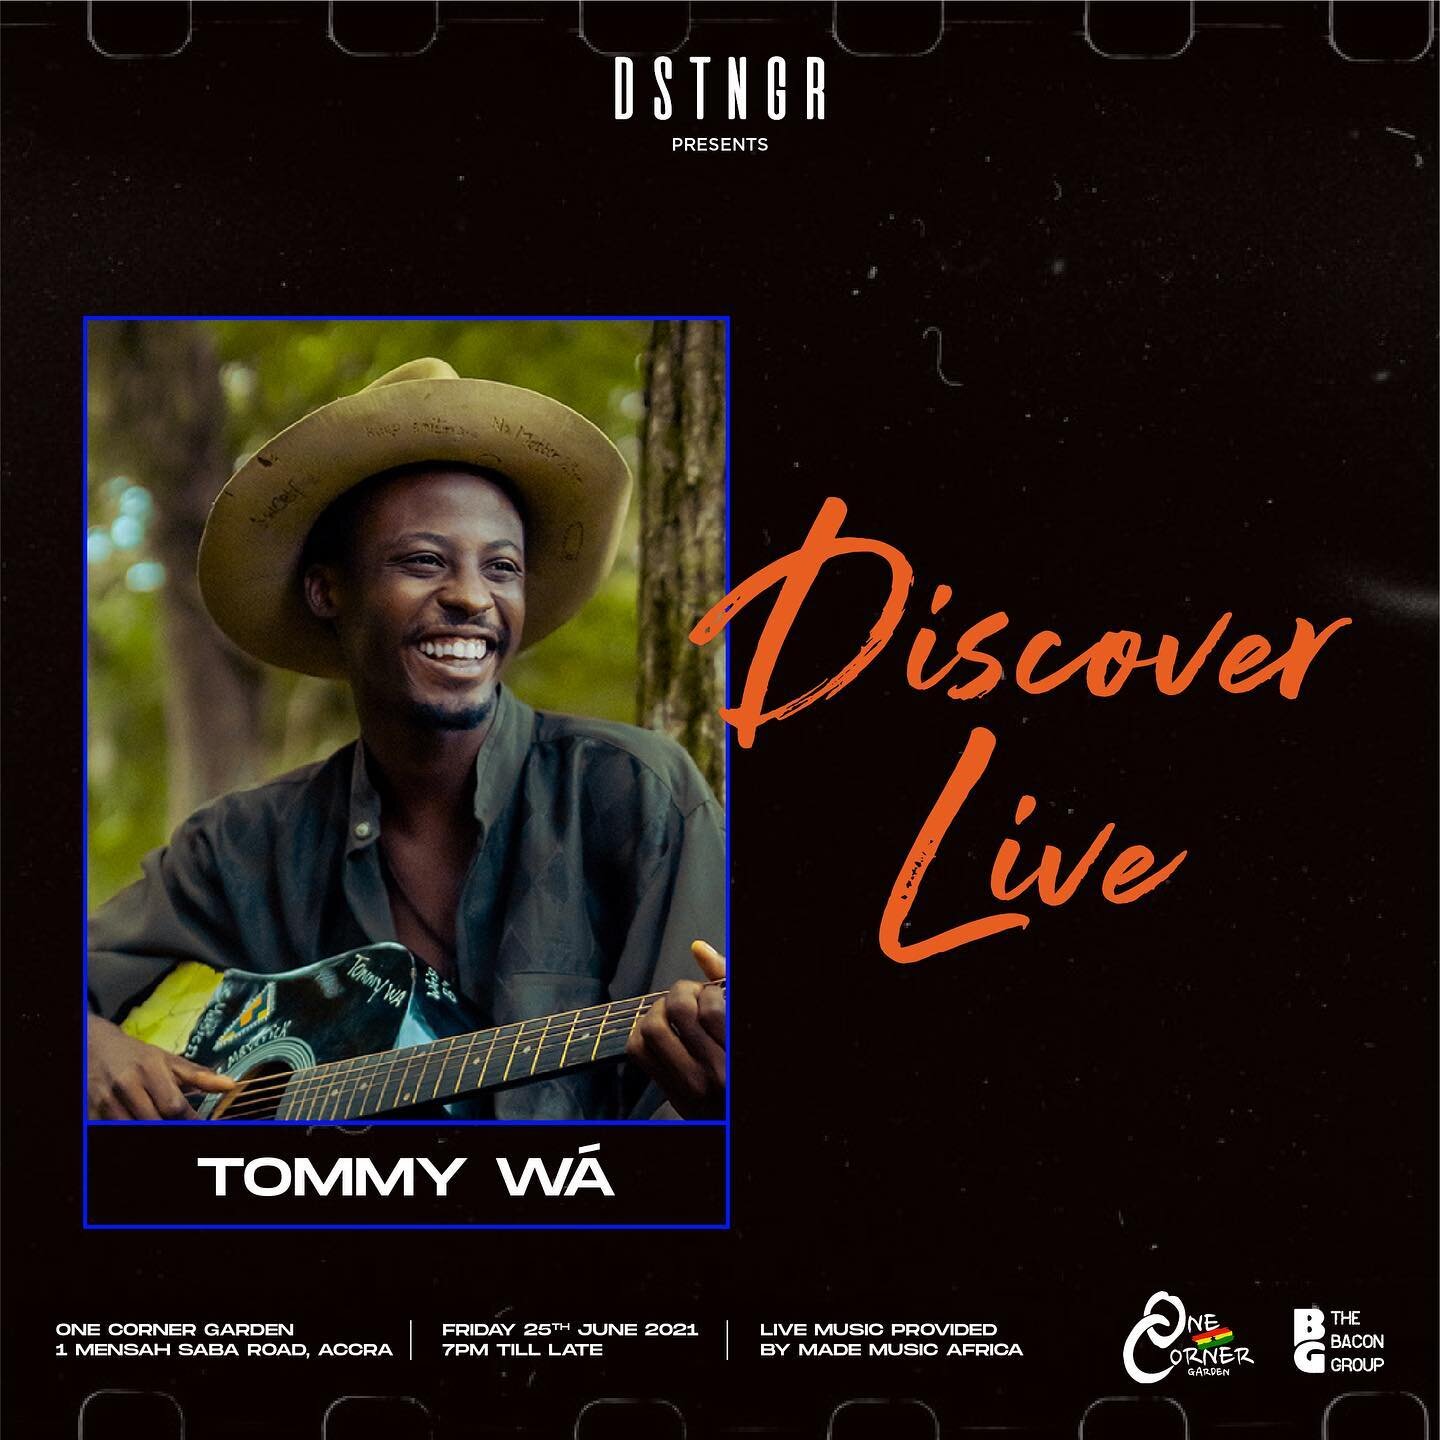 This FRIDAY! Nigerian Afro-Indie musician @tommywatomiwa is our incredible opening act for &lsquo;DISCOVER LIVE&rsquo; at @onecornergh!

FREE ENTRY! Doors open at 7PM! 

Swipe left to see his limited edition &lsquo;DISCOVER LIVE&rsquo; tee. Link in b